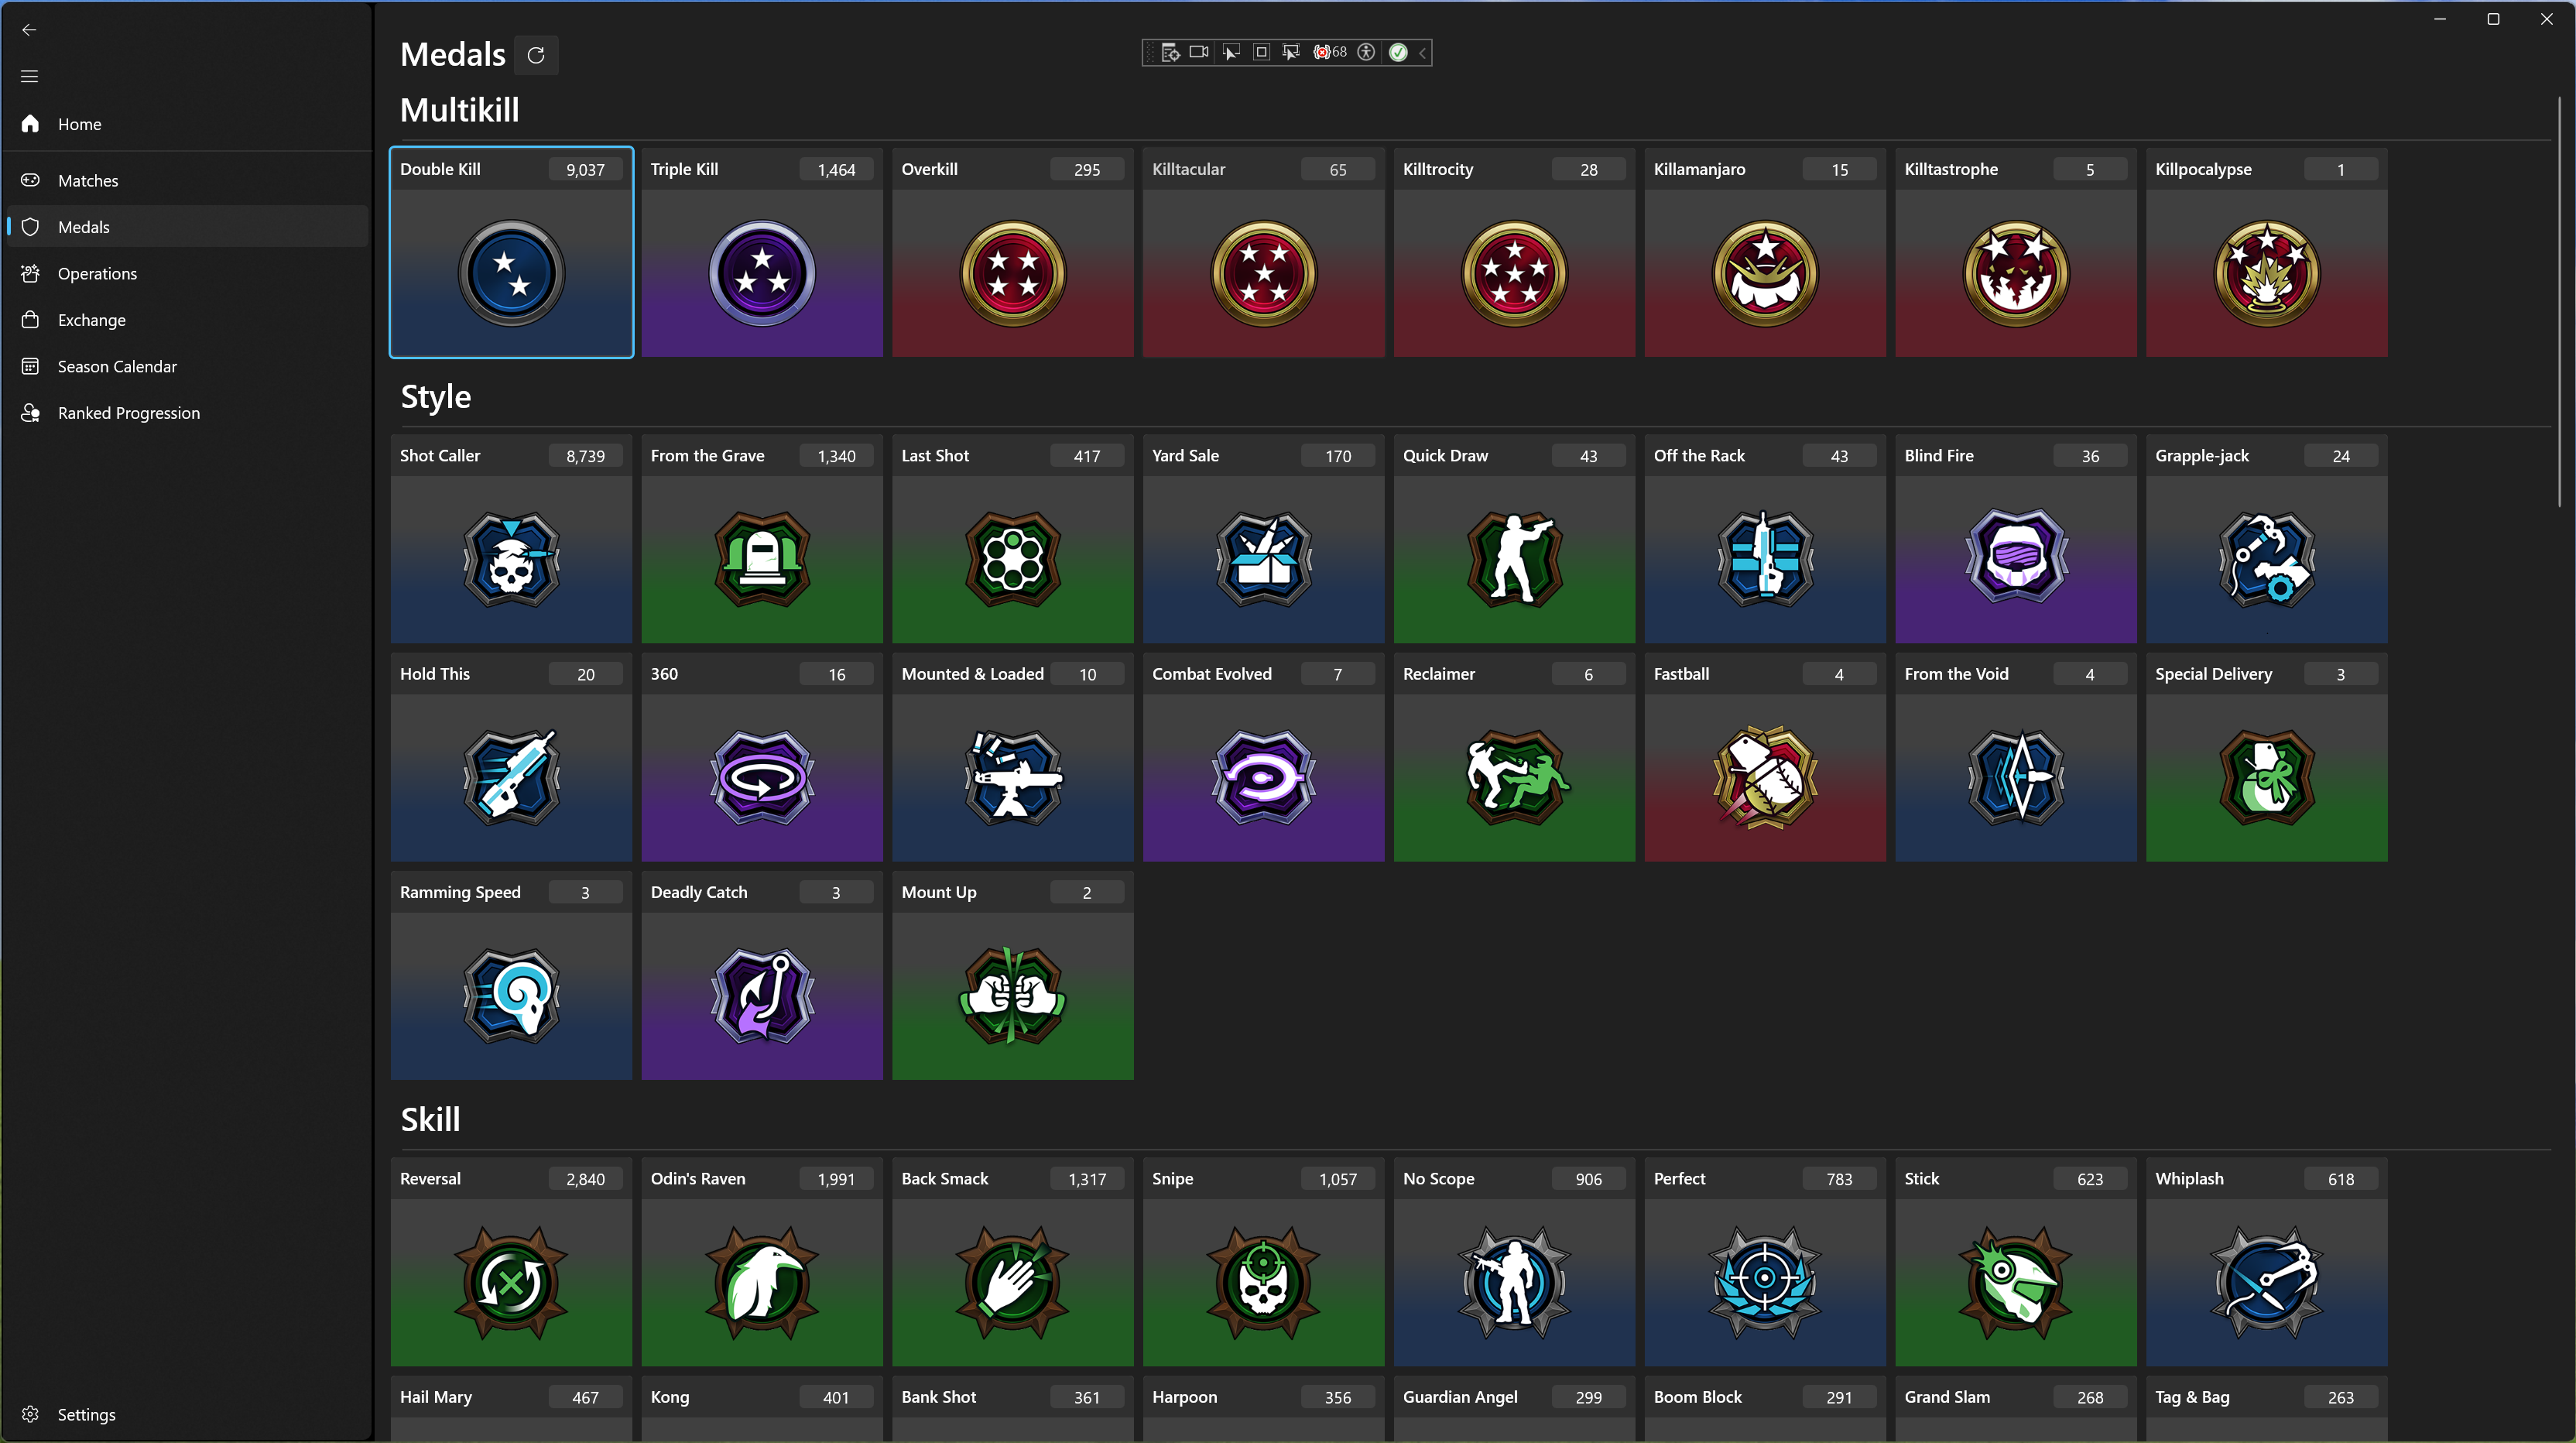 Medals, as seen in OpenSpartan Workshop, earned through the player lifetime